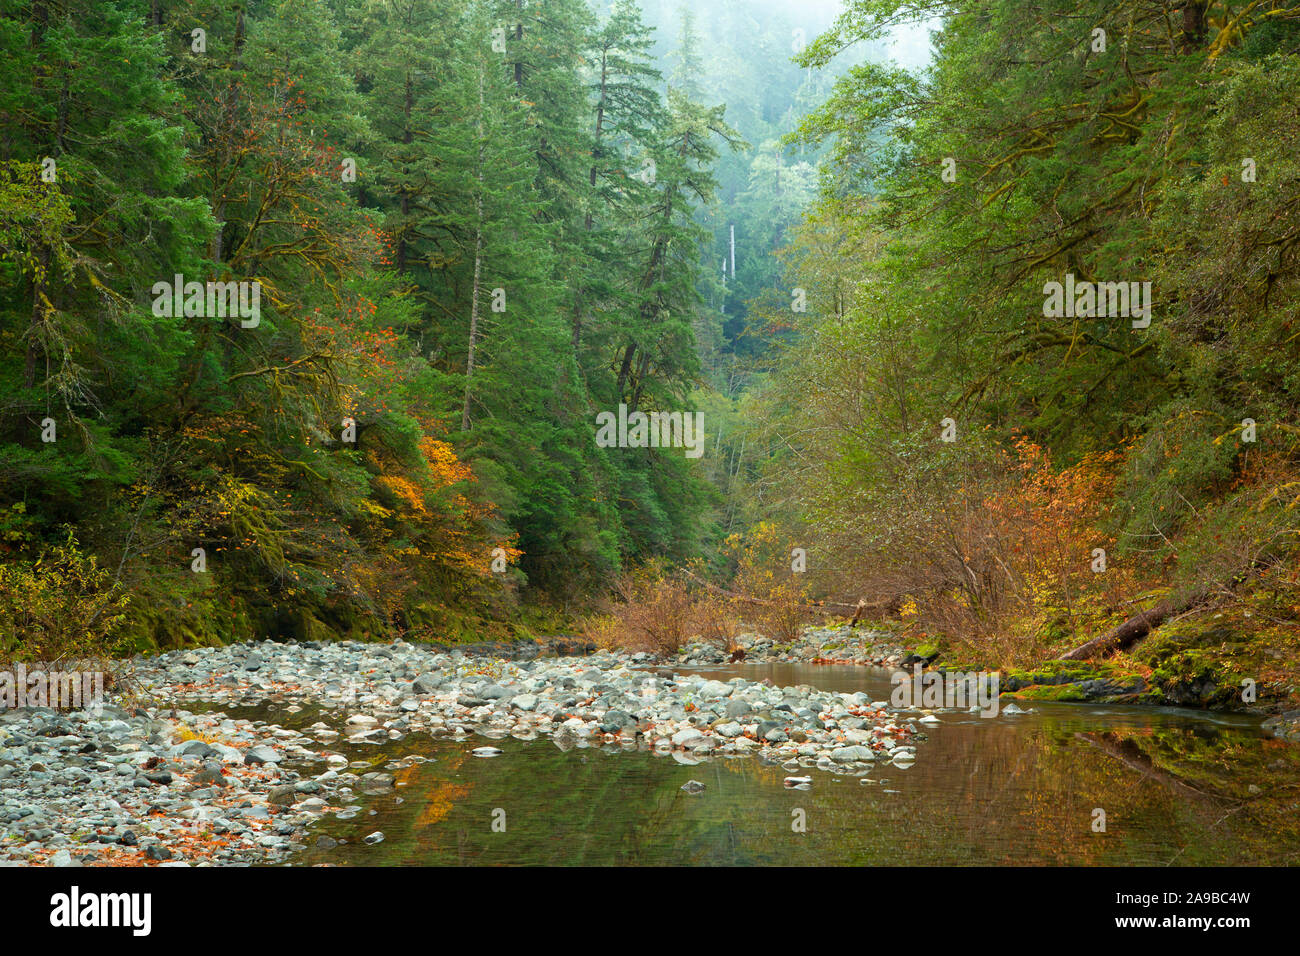 Elch Wild and Scenic River, Siskiyou National Forest, Oregon Stockfoto